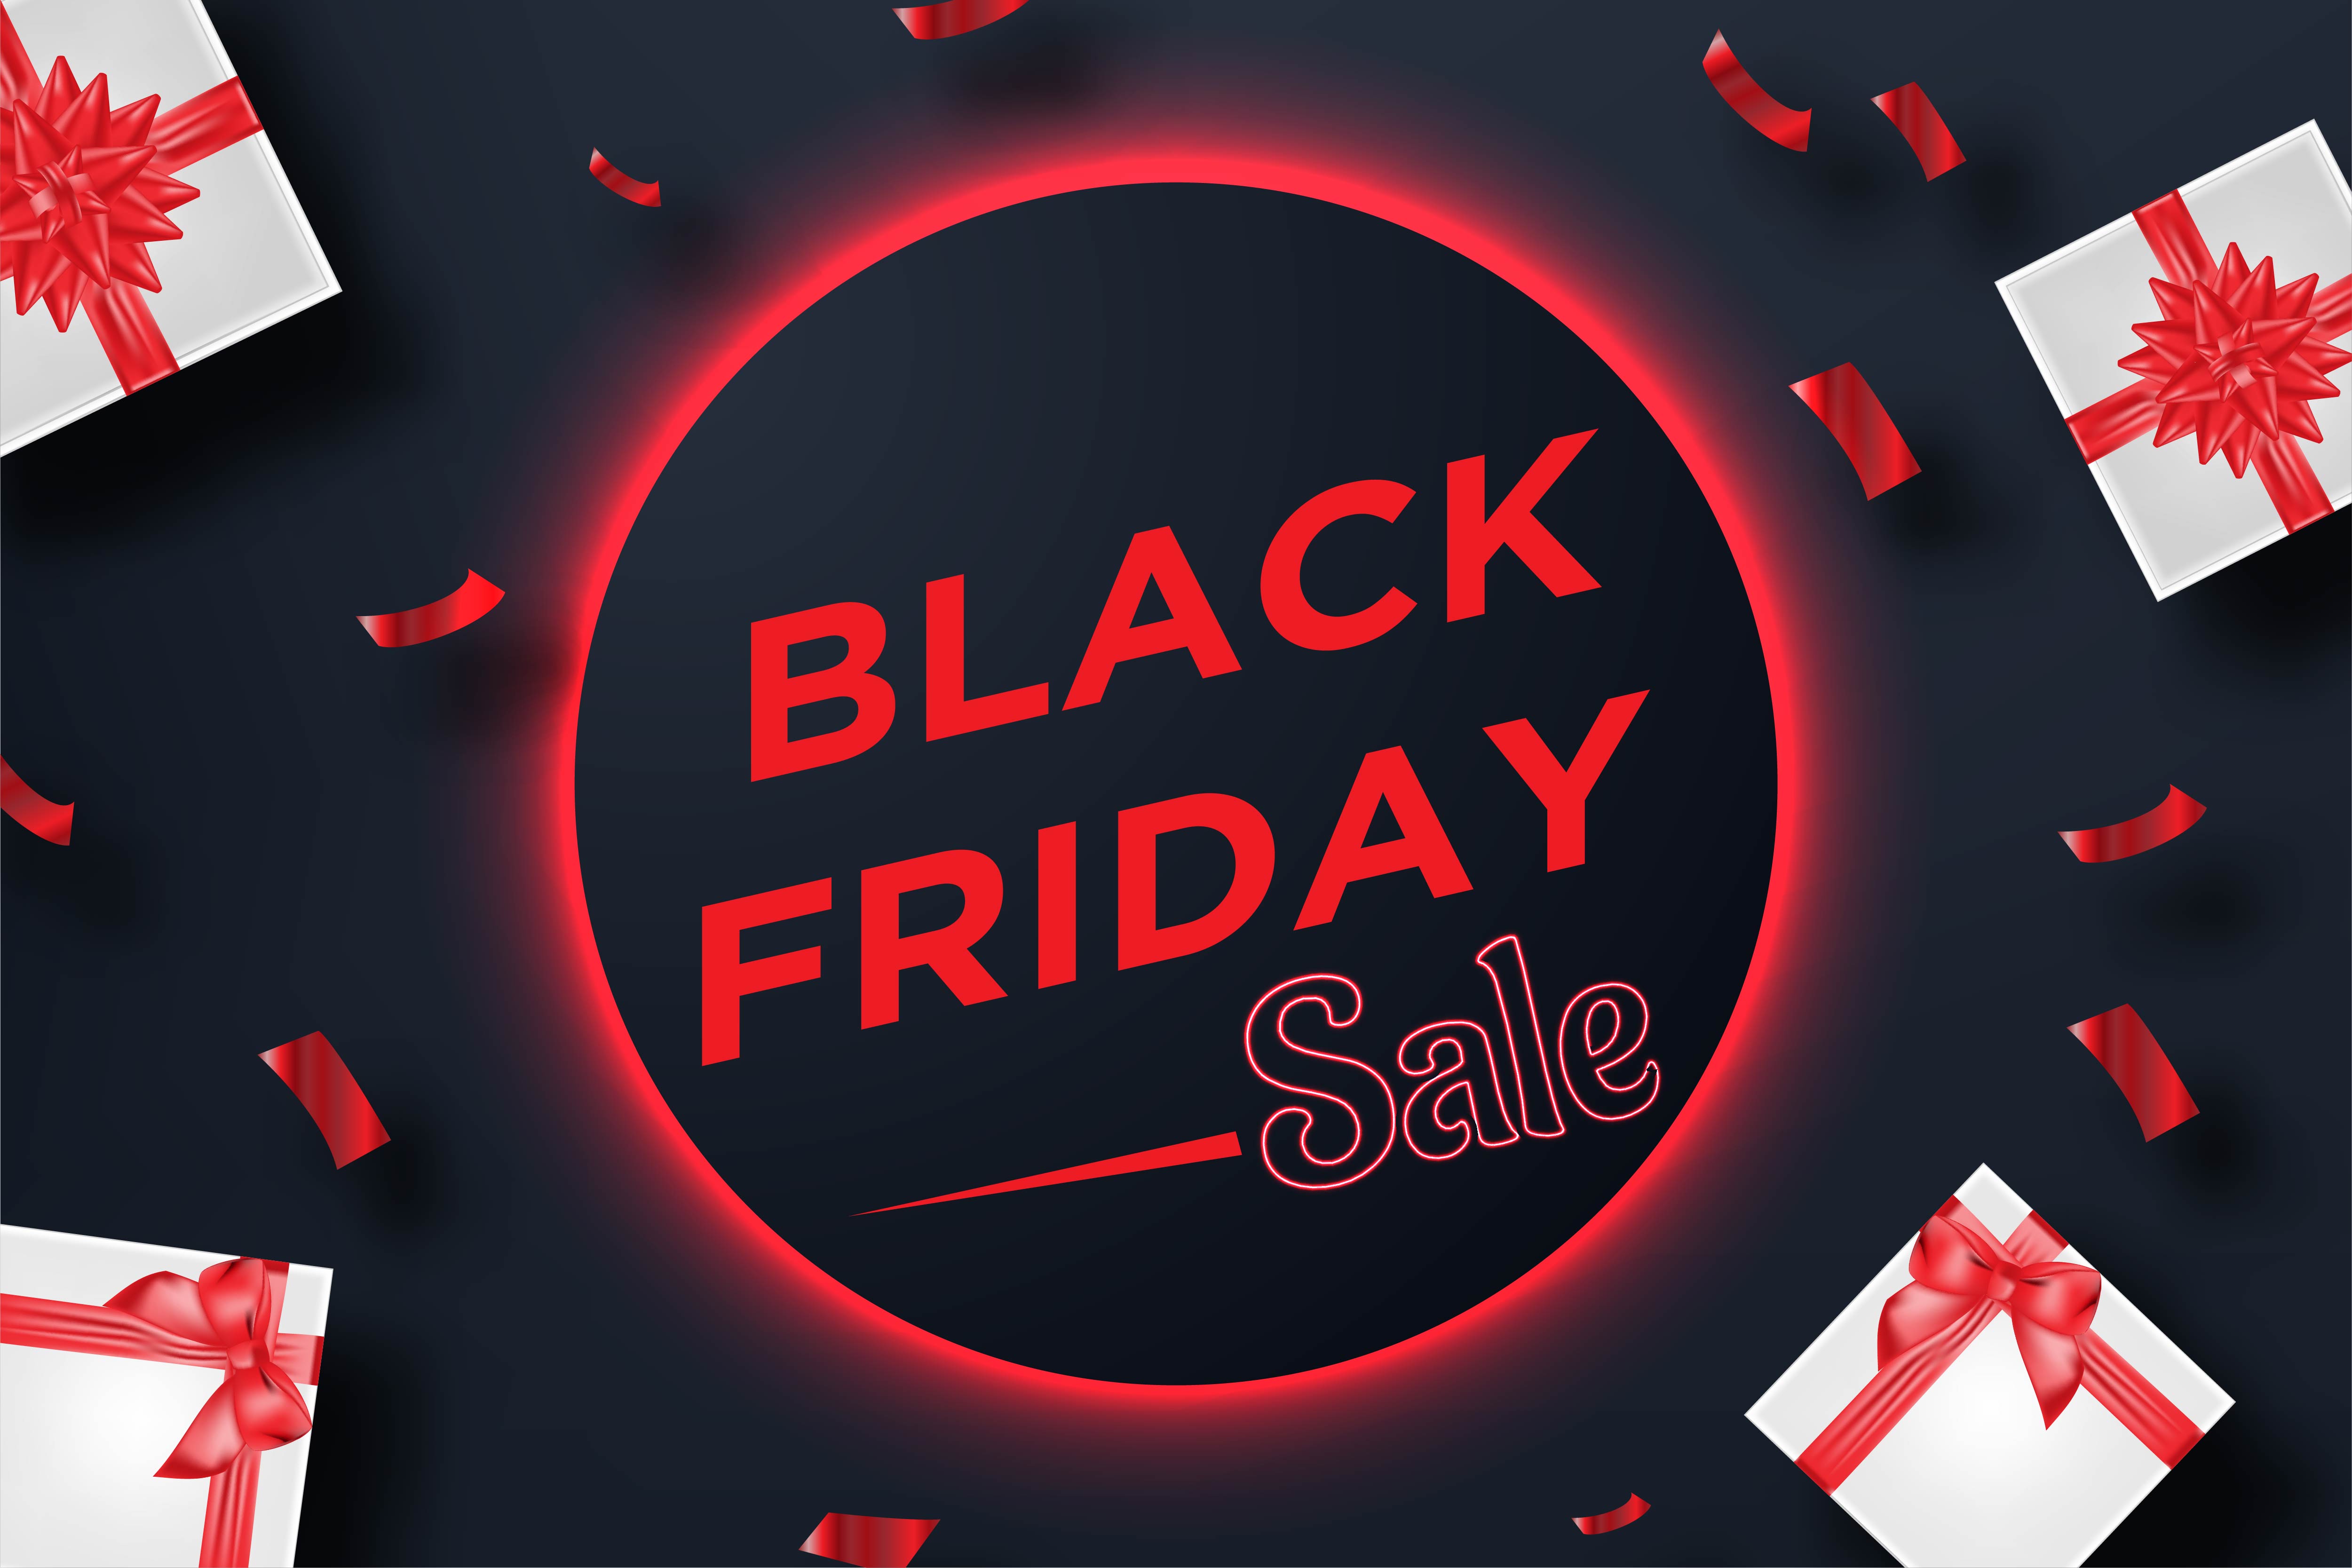 Red Black Friday sale banner with gift box and confetti 681154 Vector - What Sales Are Going On For Black Friday